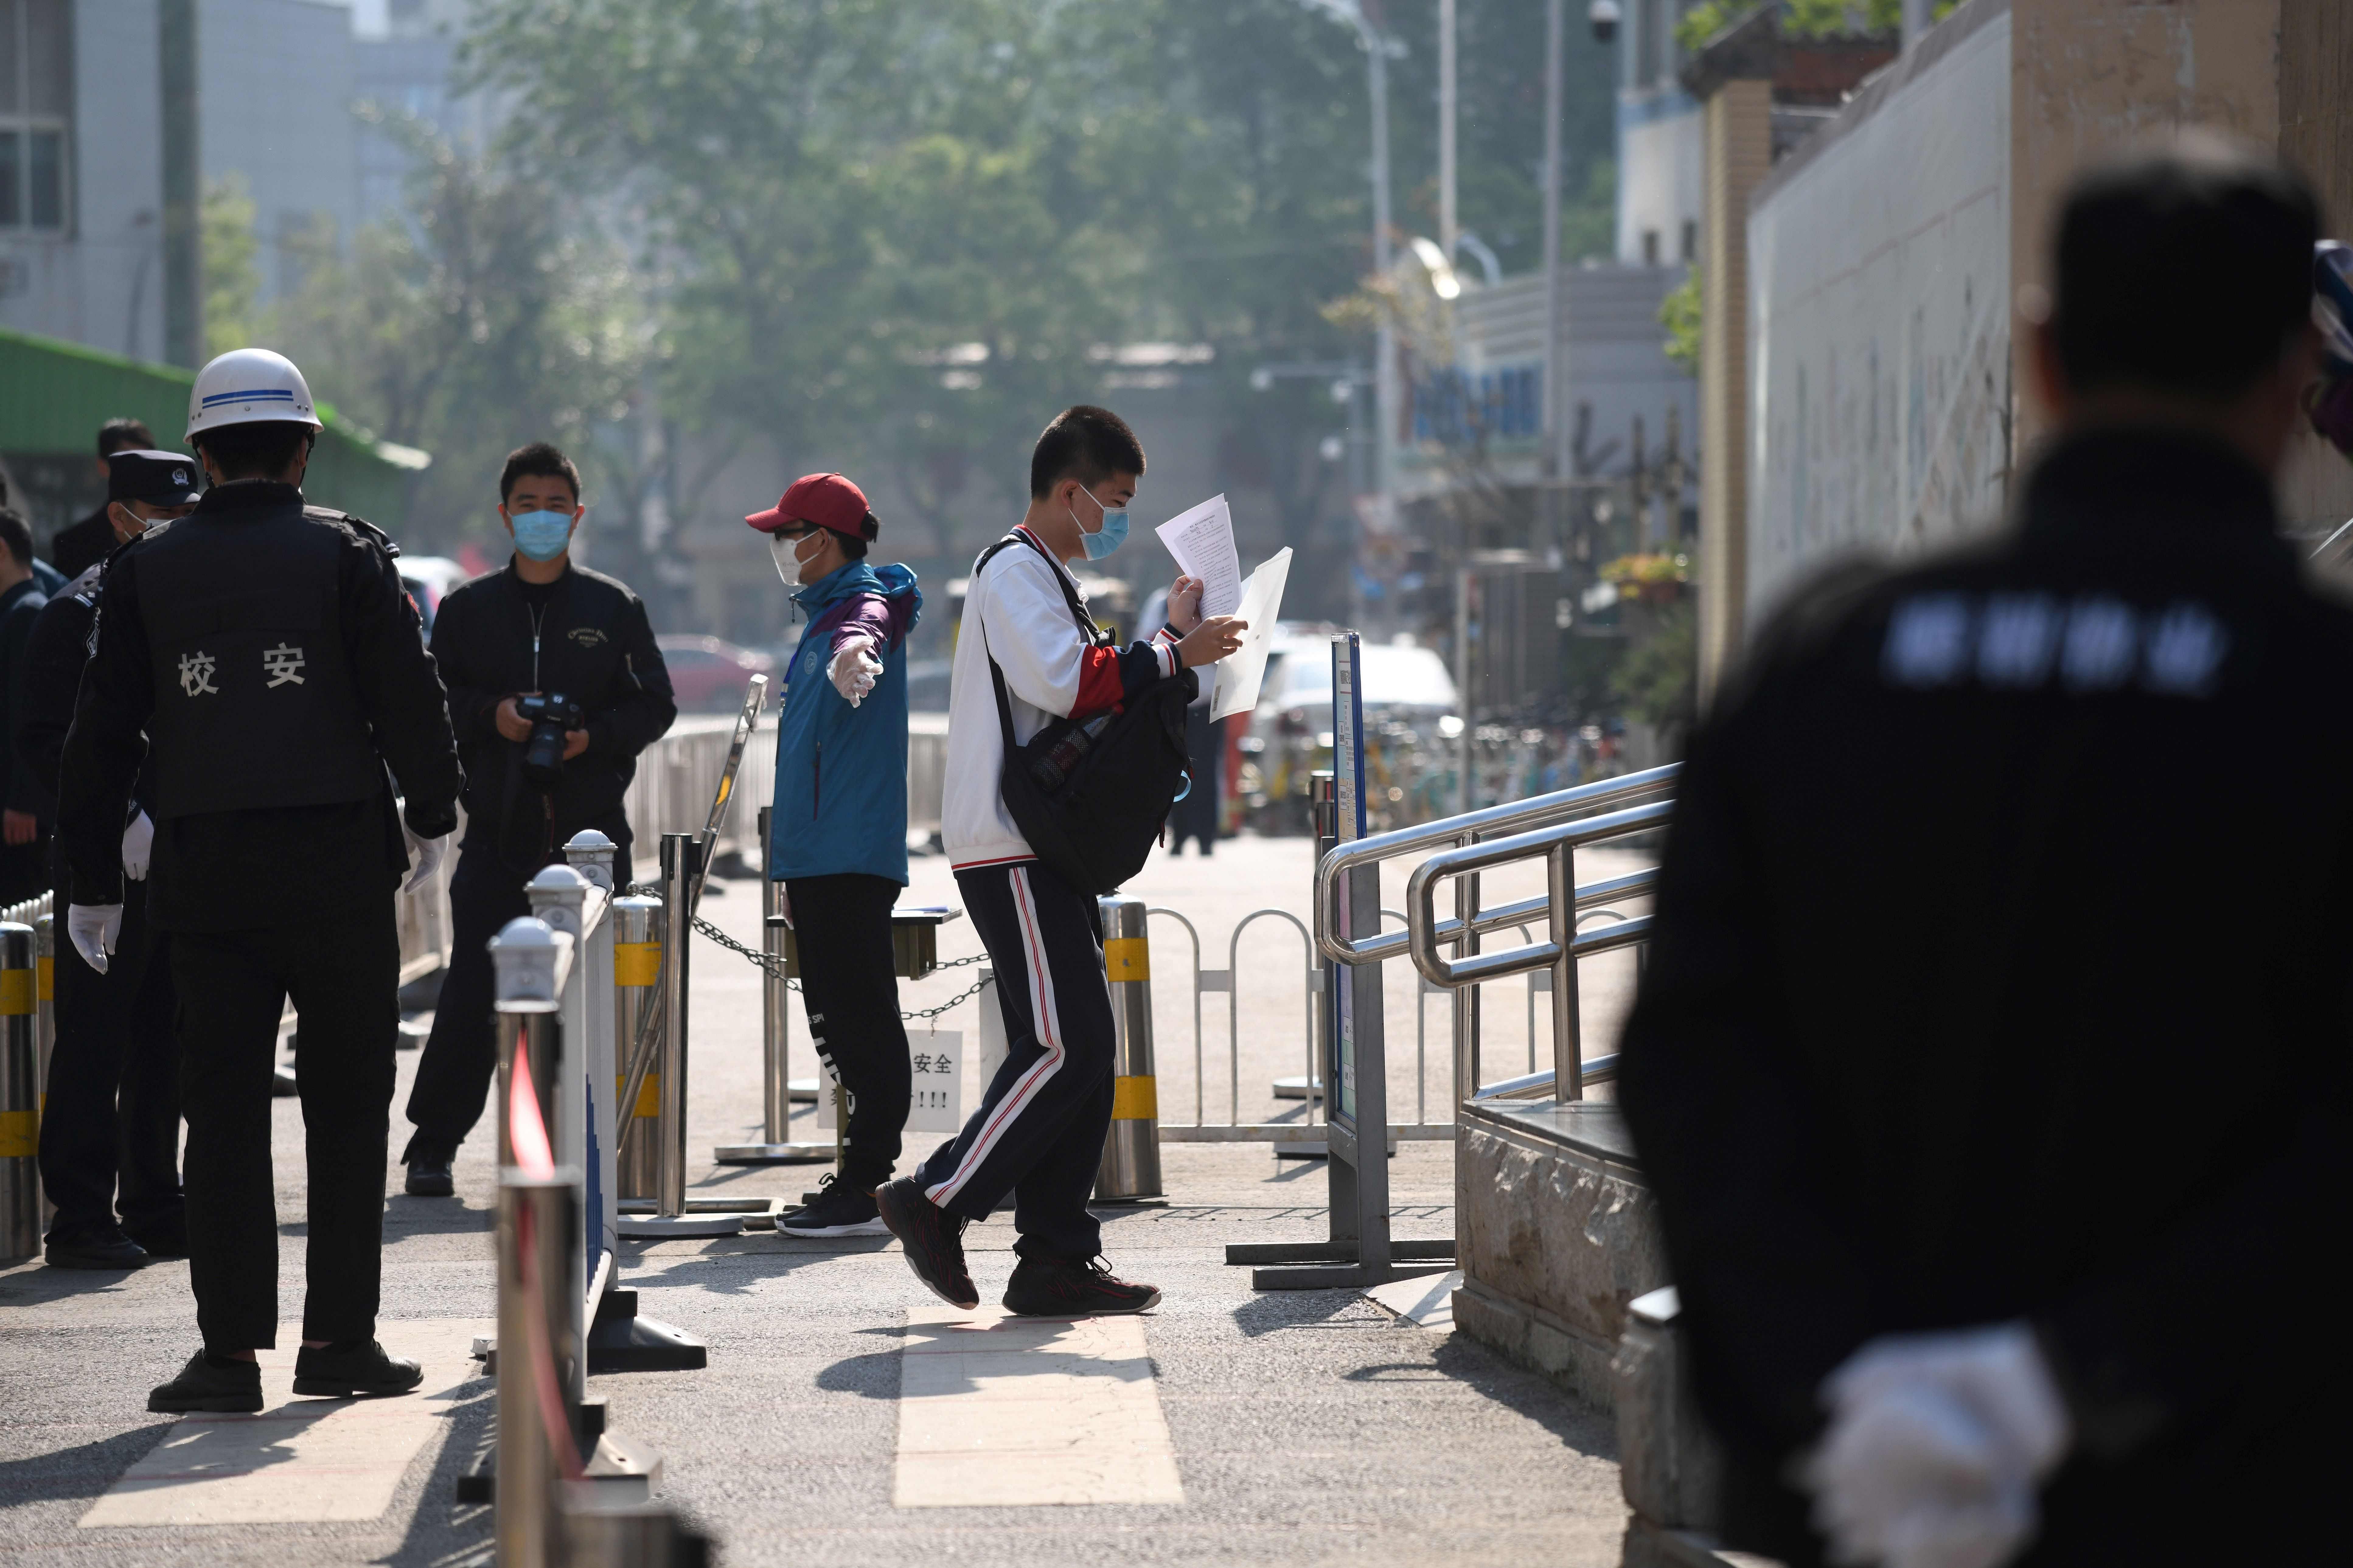 A student walks past police and officials as he arrives at a high school in Beijing. (AFP Photo)